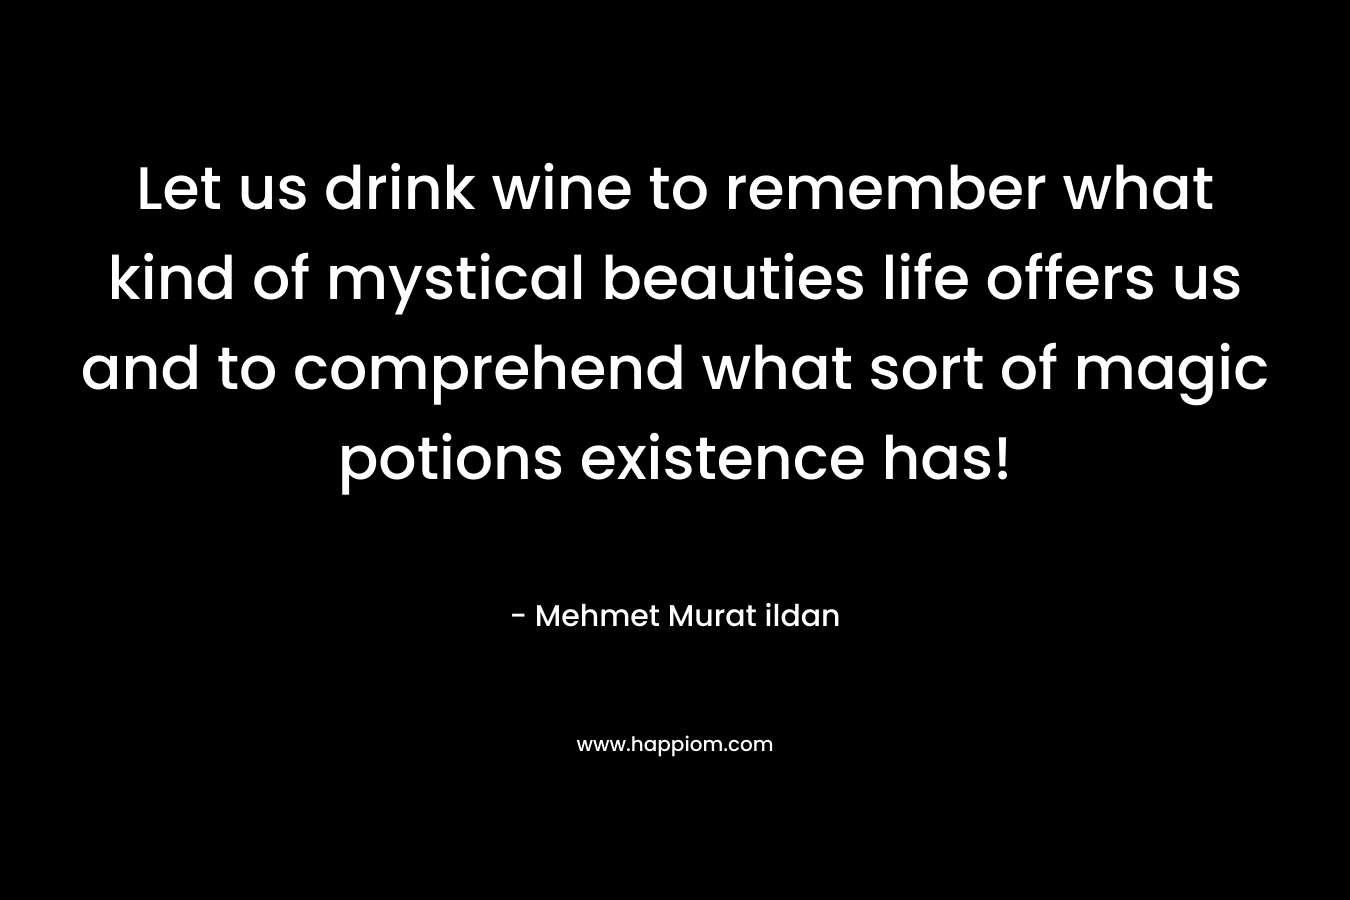 Let us drink wine to remember what kind of mystical beauties life offers us and to comprehend what sort of magic potions existence has! – Mehmet Murat ildan